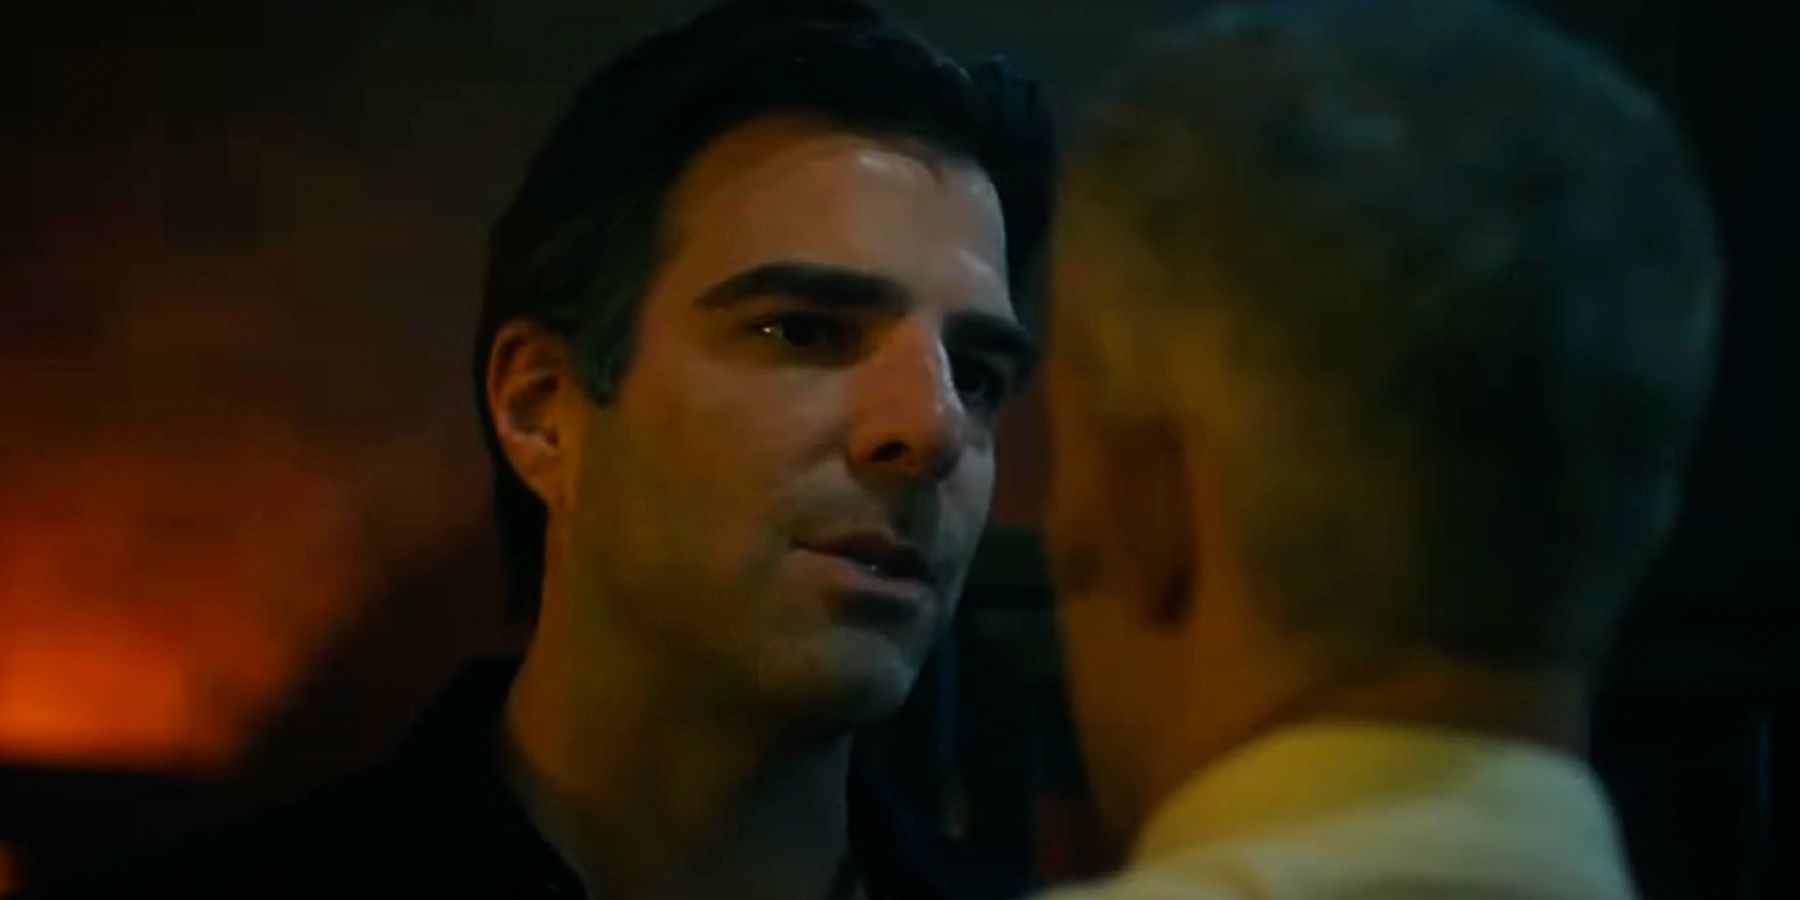 American Horror Story: Sam (Zachary Quinto) stares down a man